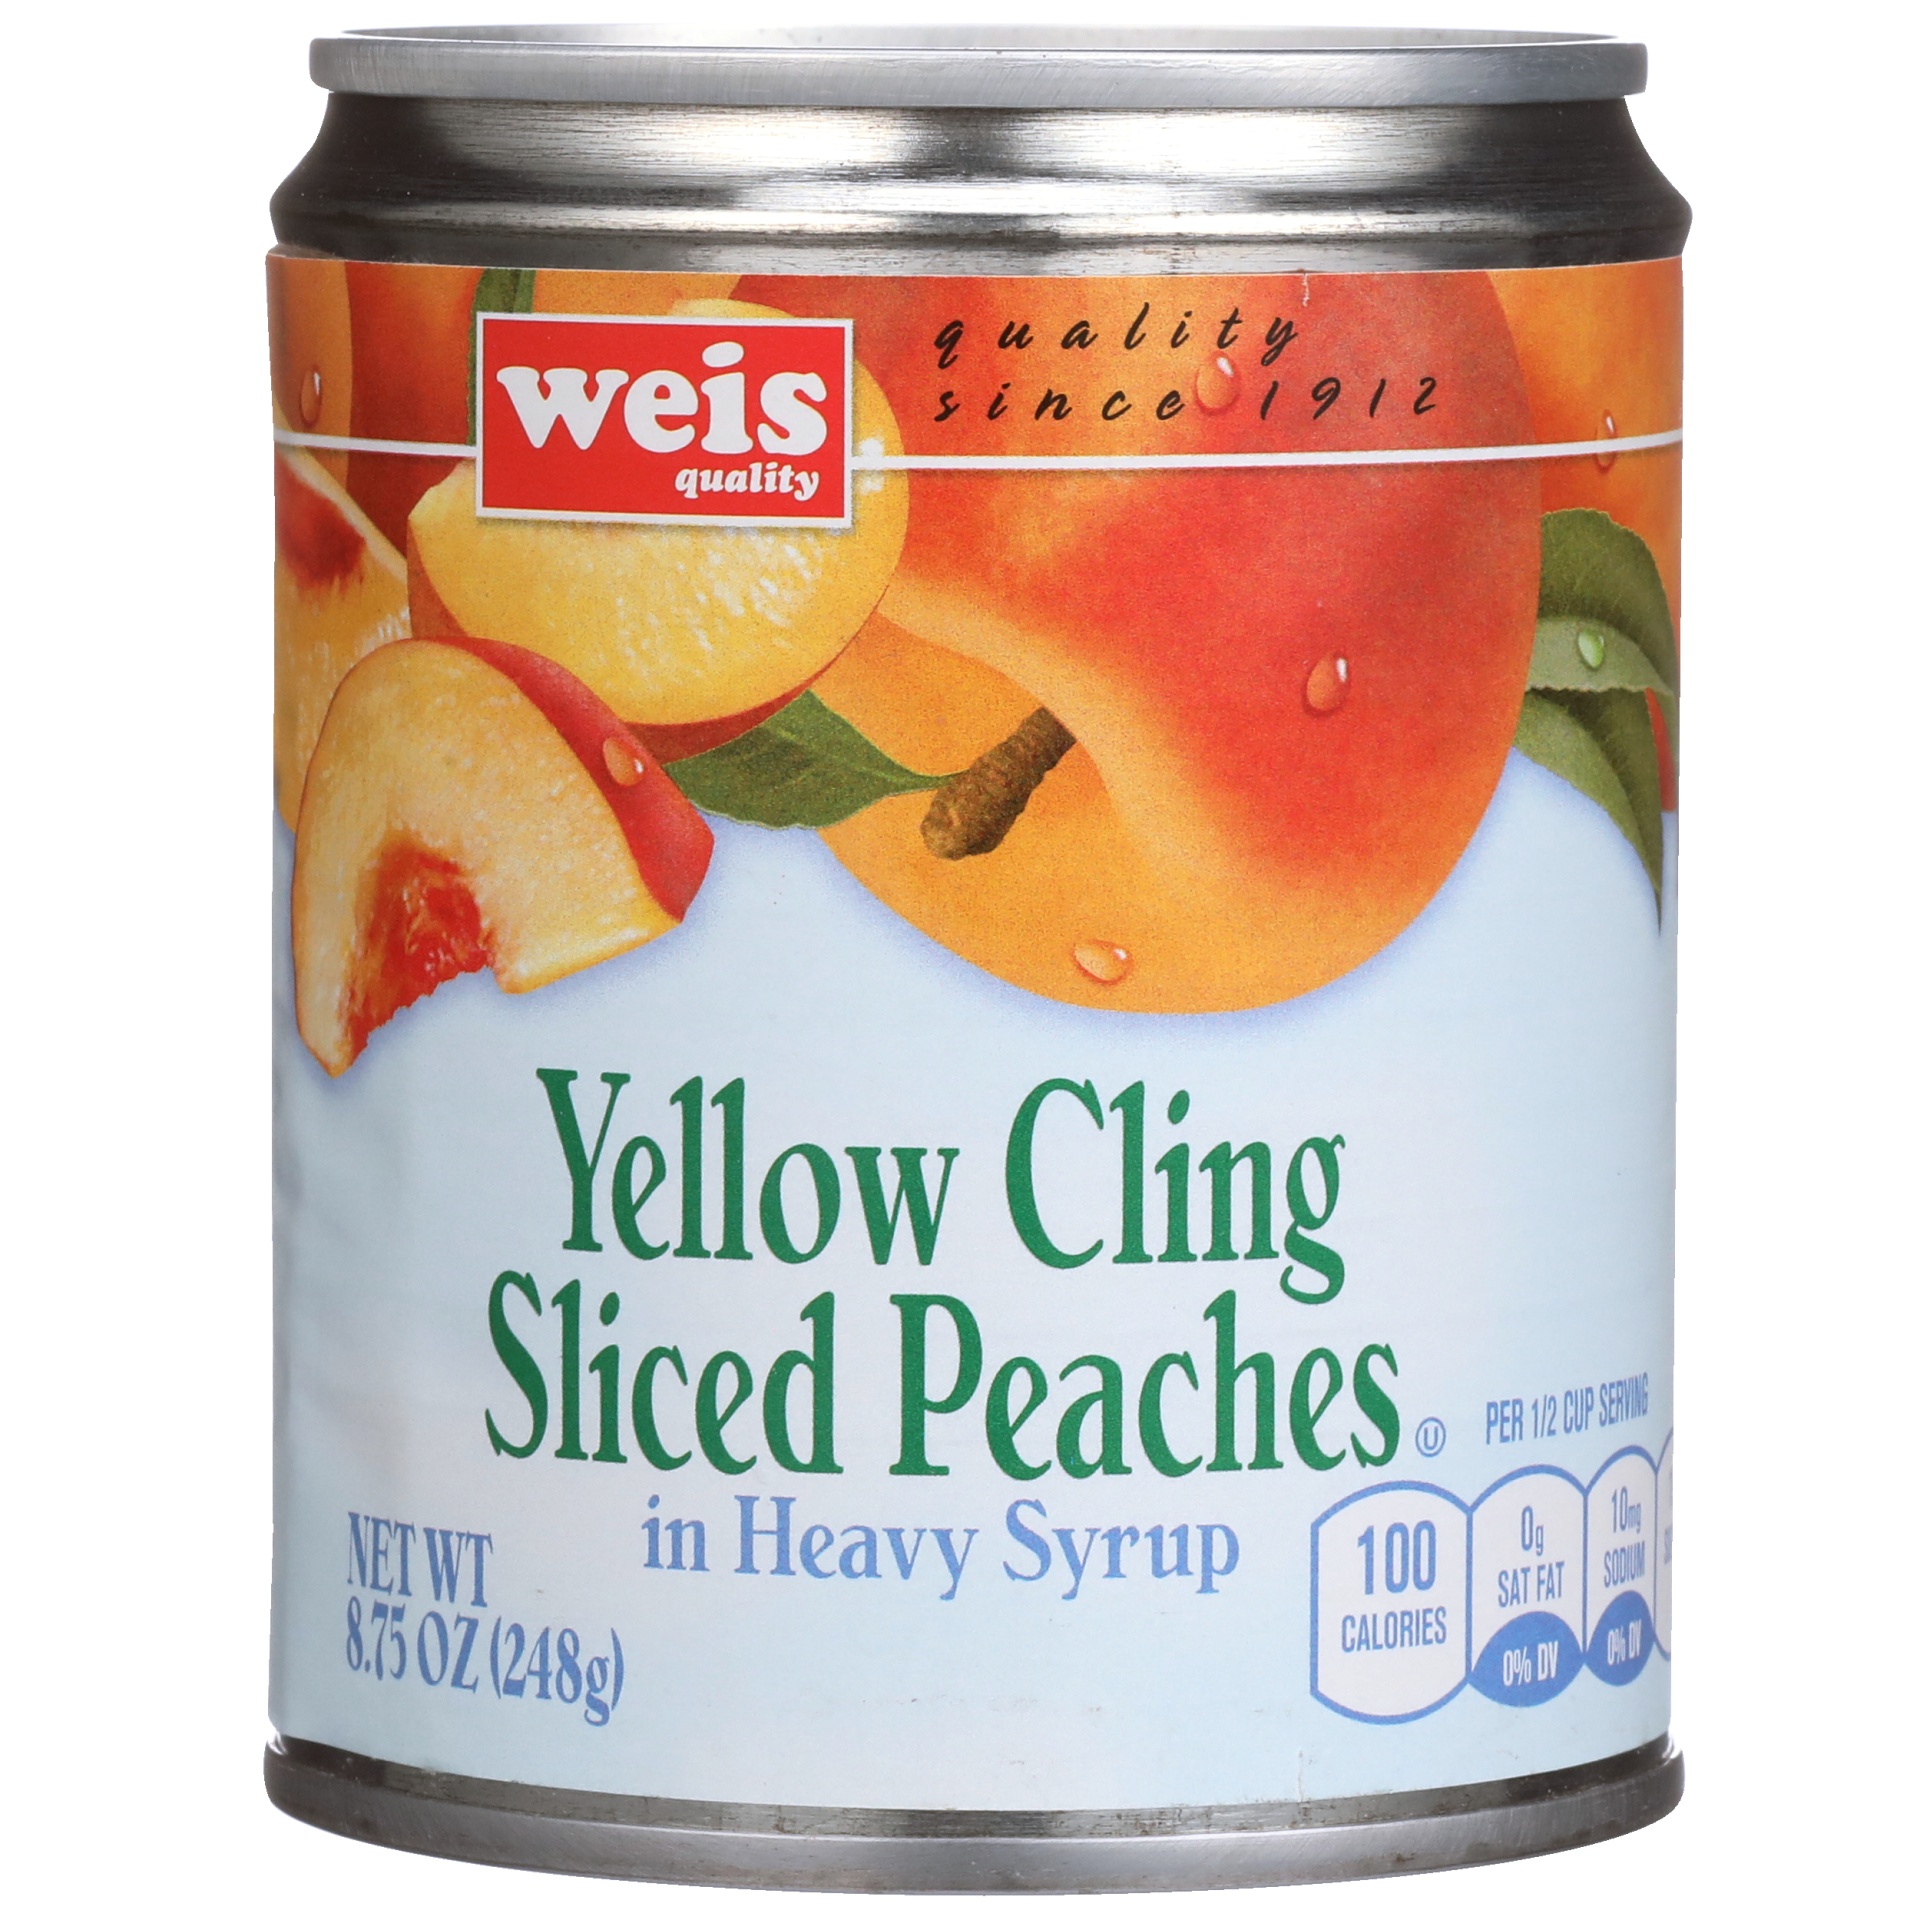 slide 1 of 6, Weis Quality Yellow Cling Sliced Peaches in Heavy Syrup Canned Fruit, 8.75 oz